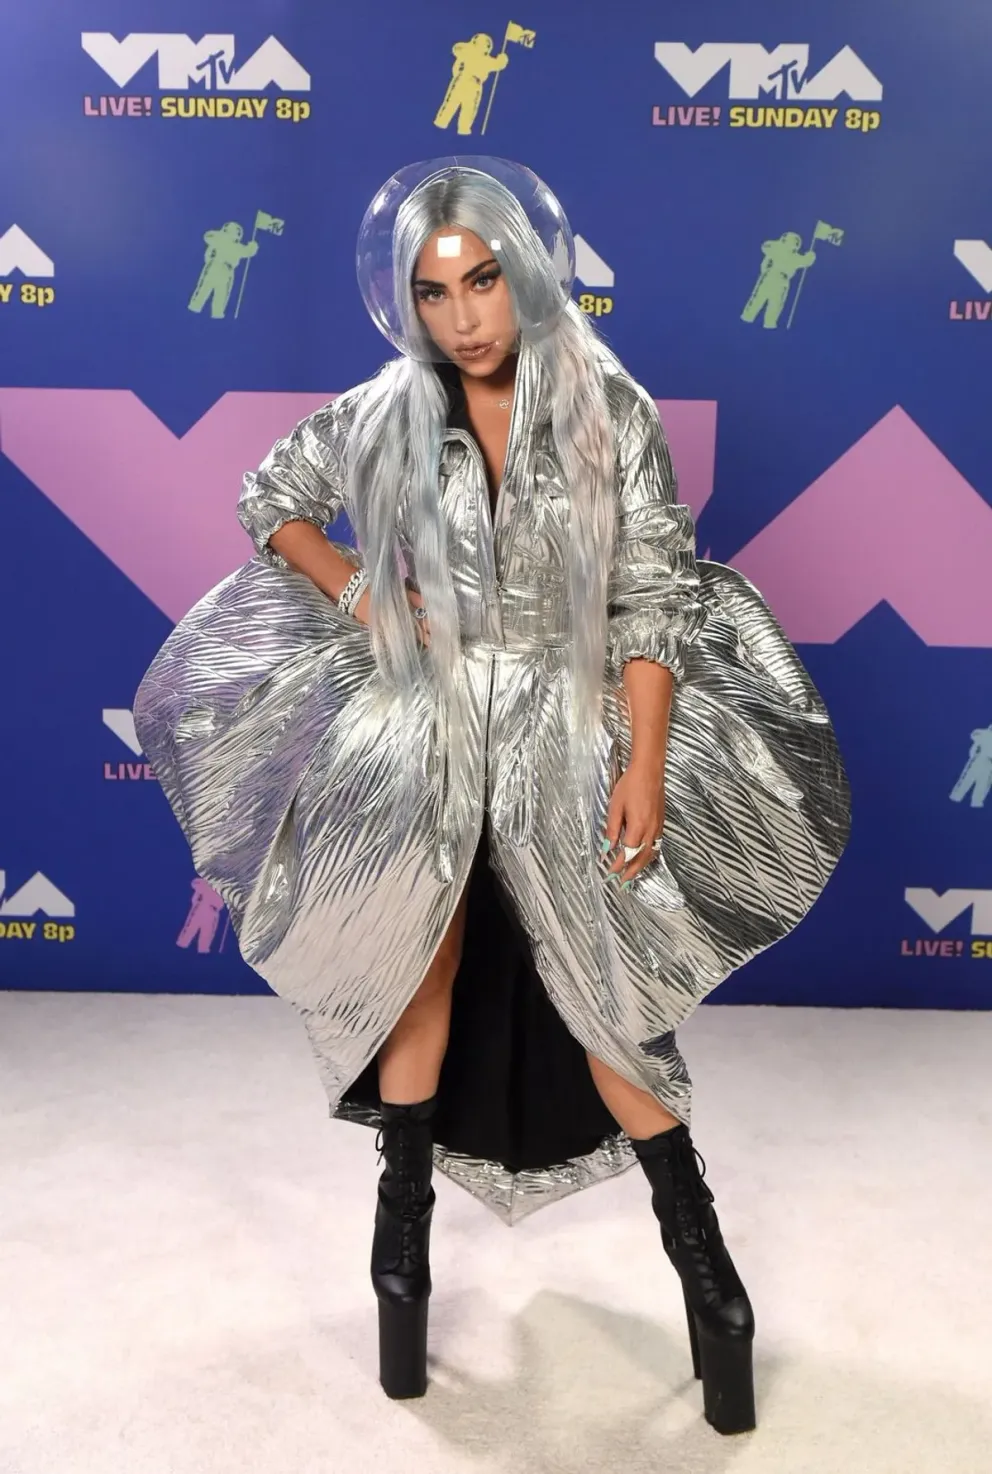 Lady Gaga at the 2020 MTV Video Music Awards, broadcast on Sunday, August 30th 2020. | Getty Images